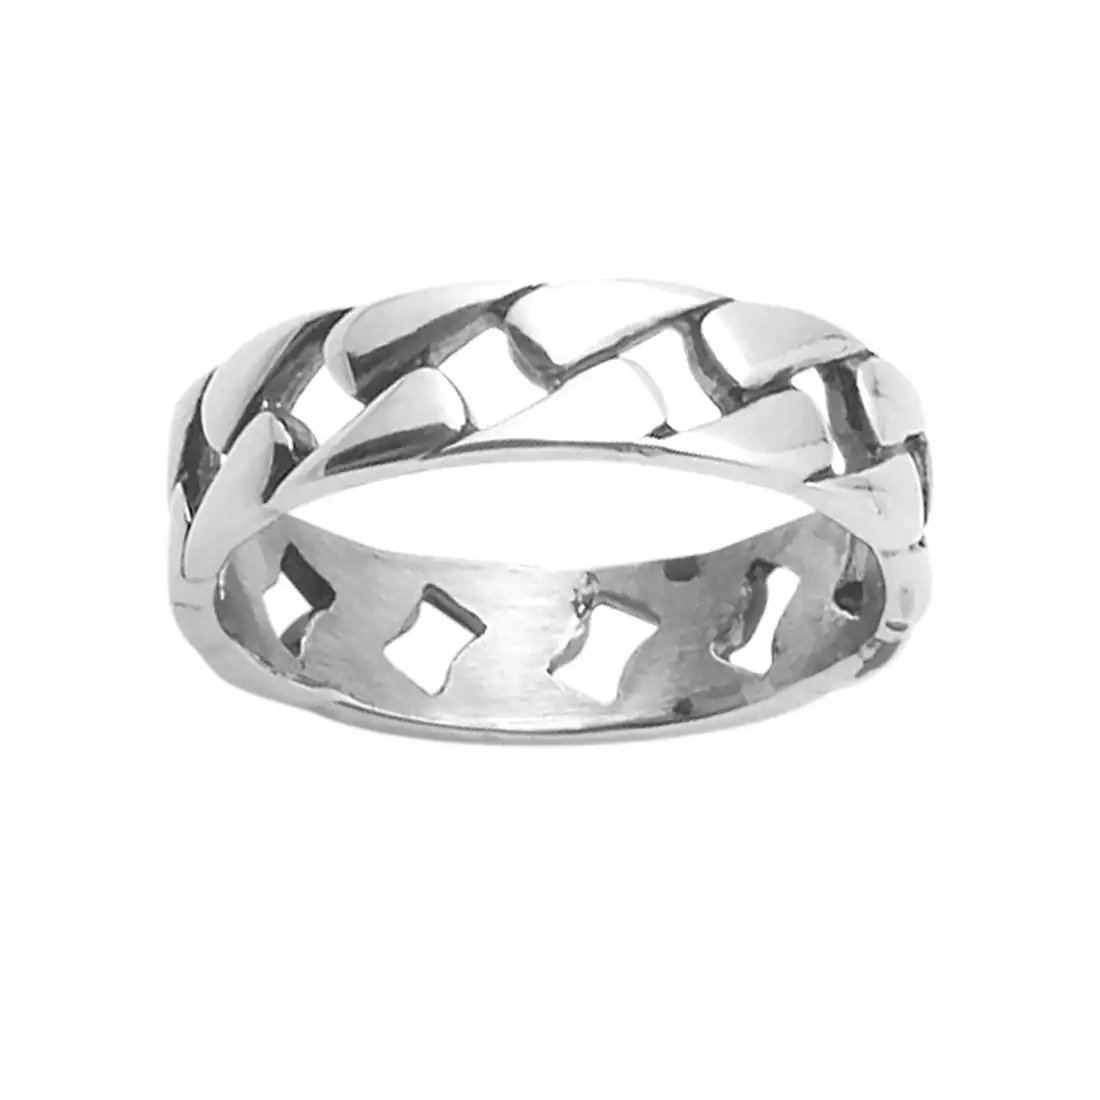 Men's Cub Link Ring in Stainless Steel